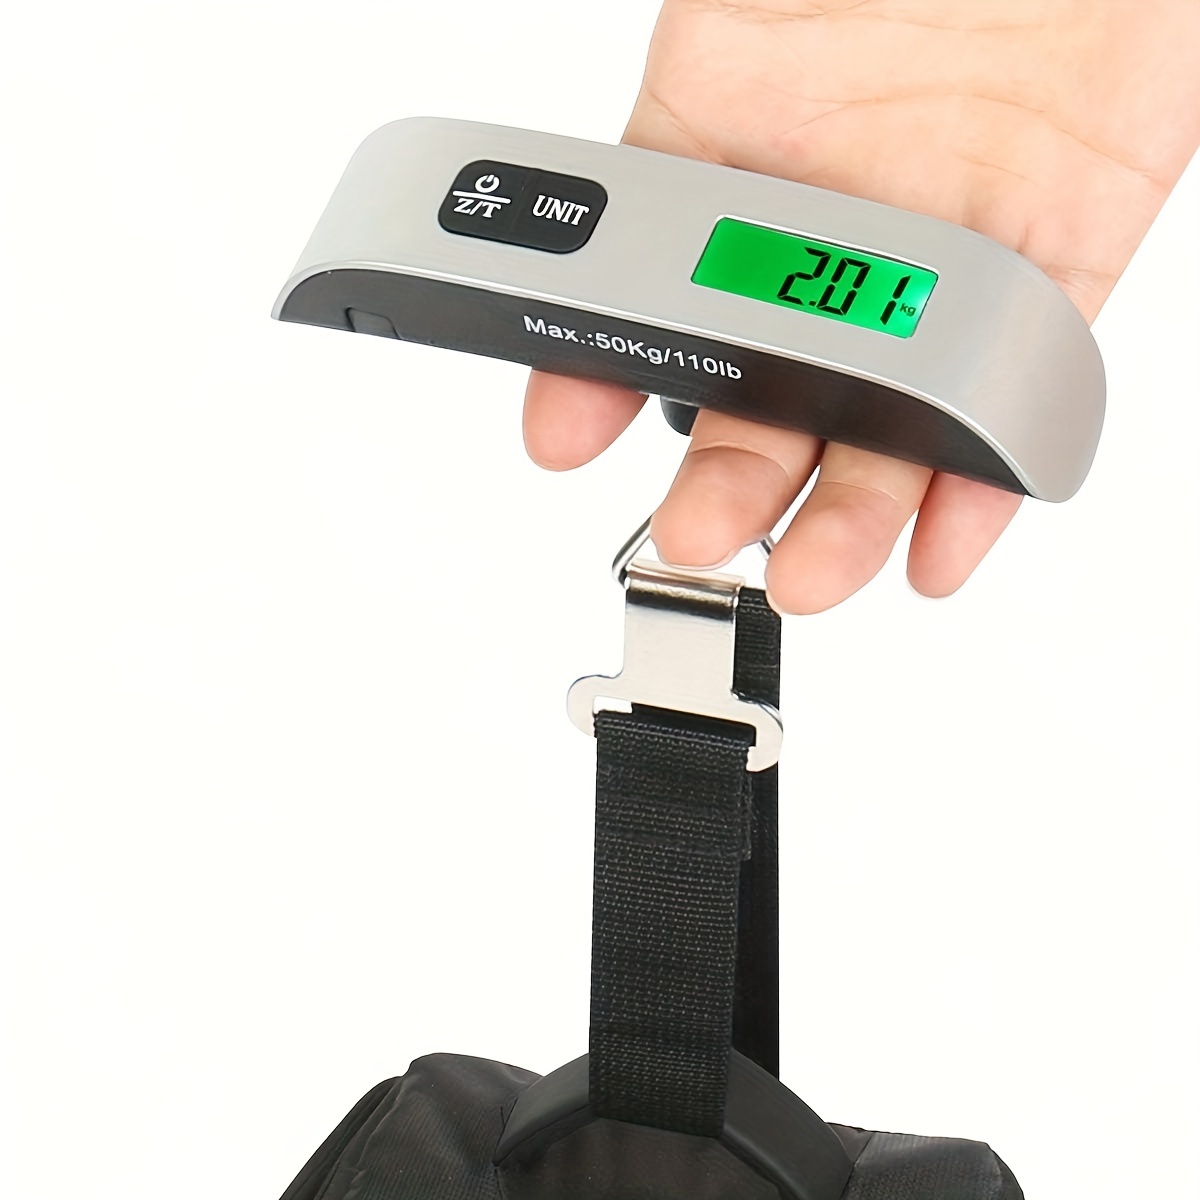 Travel Inspira 110lb Digital Luggage Scale with Overweight Alert, White Red